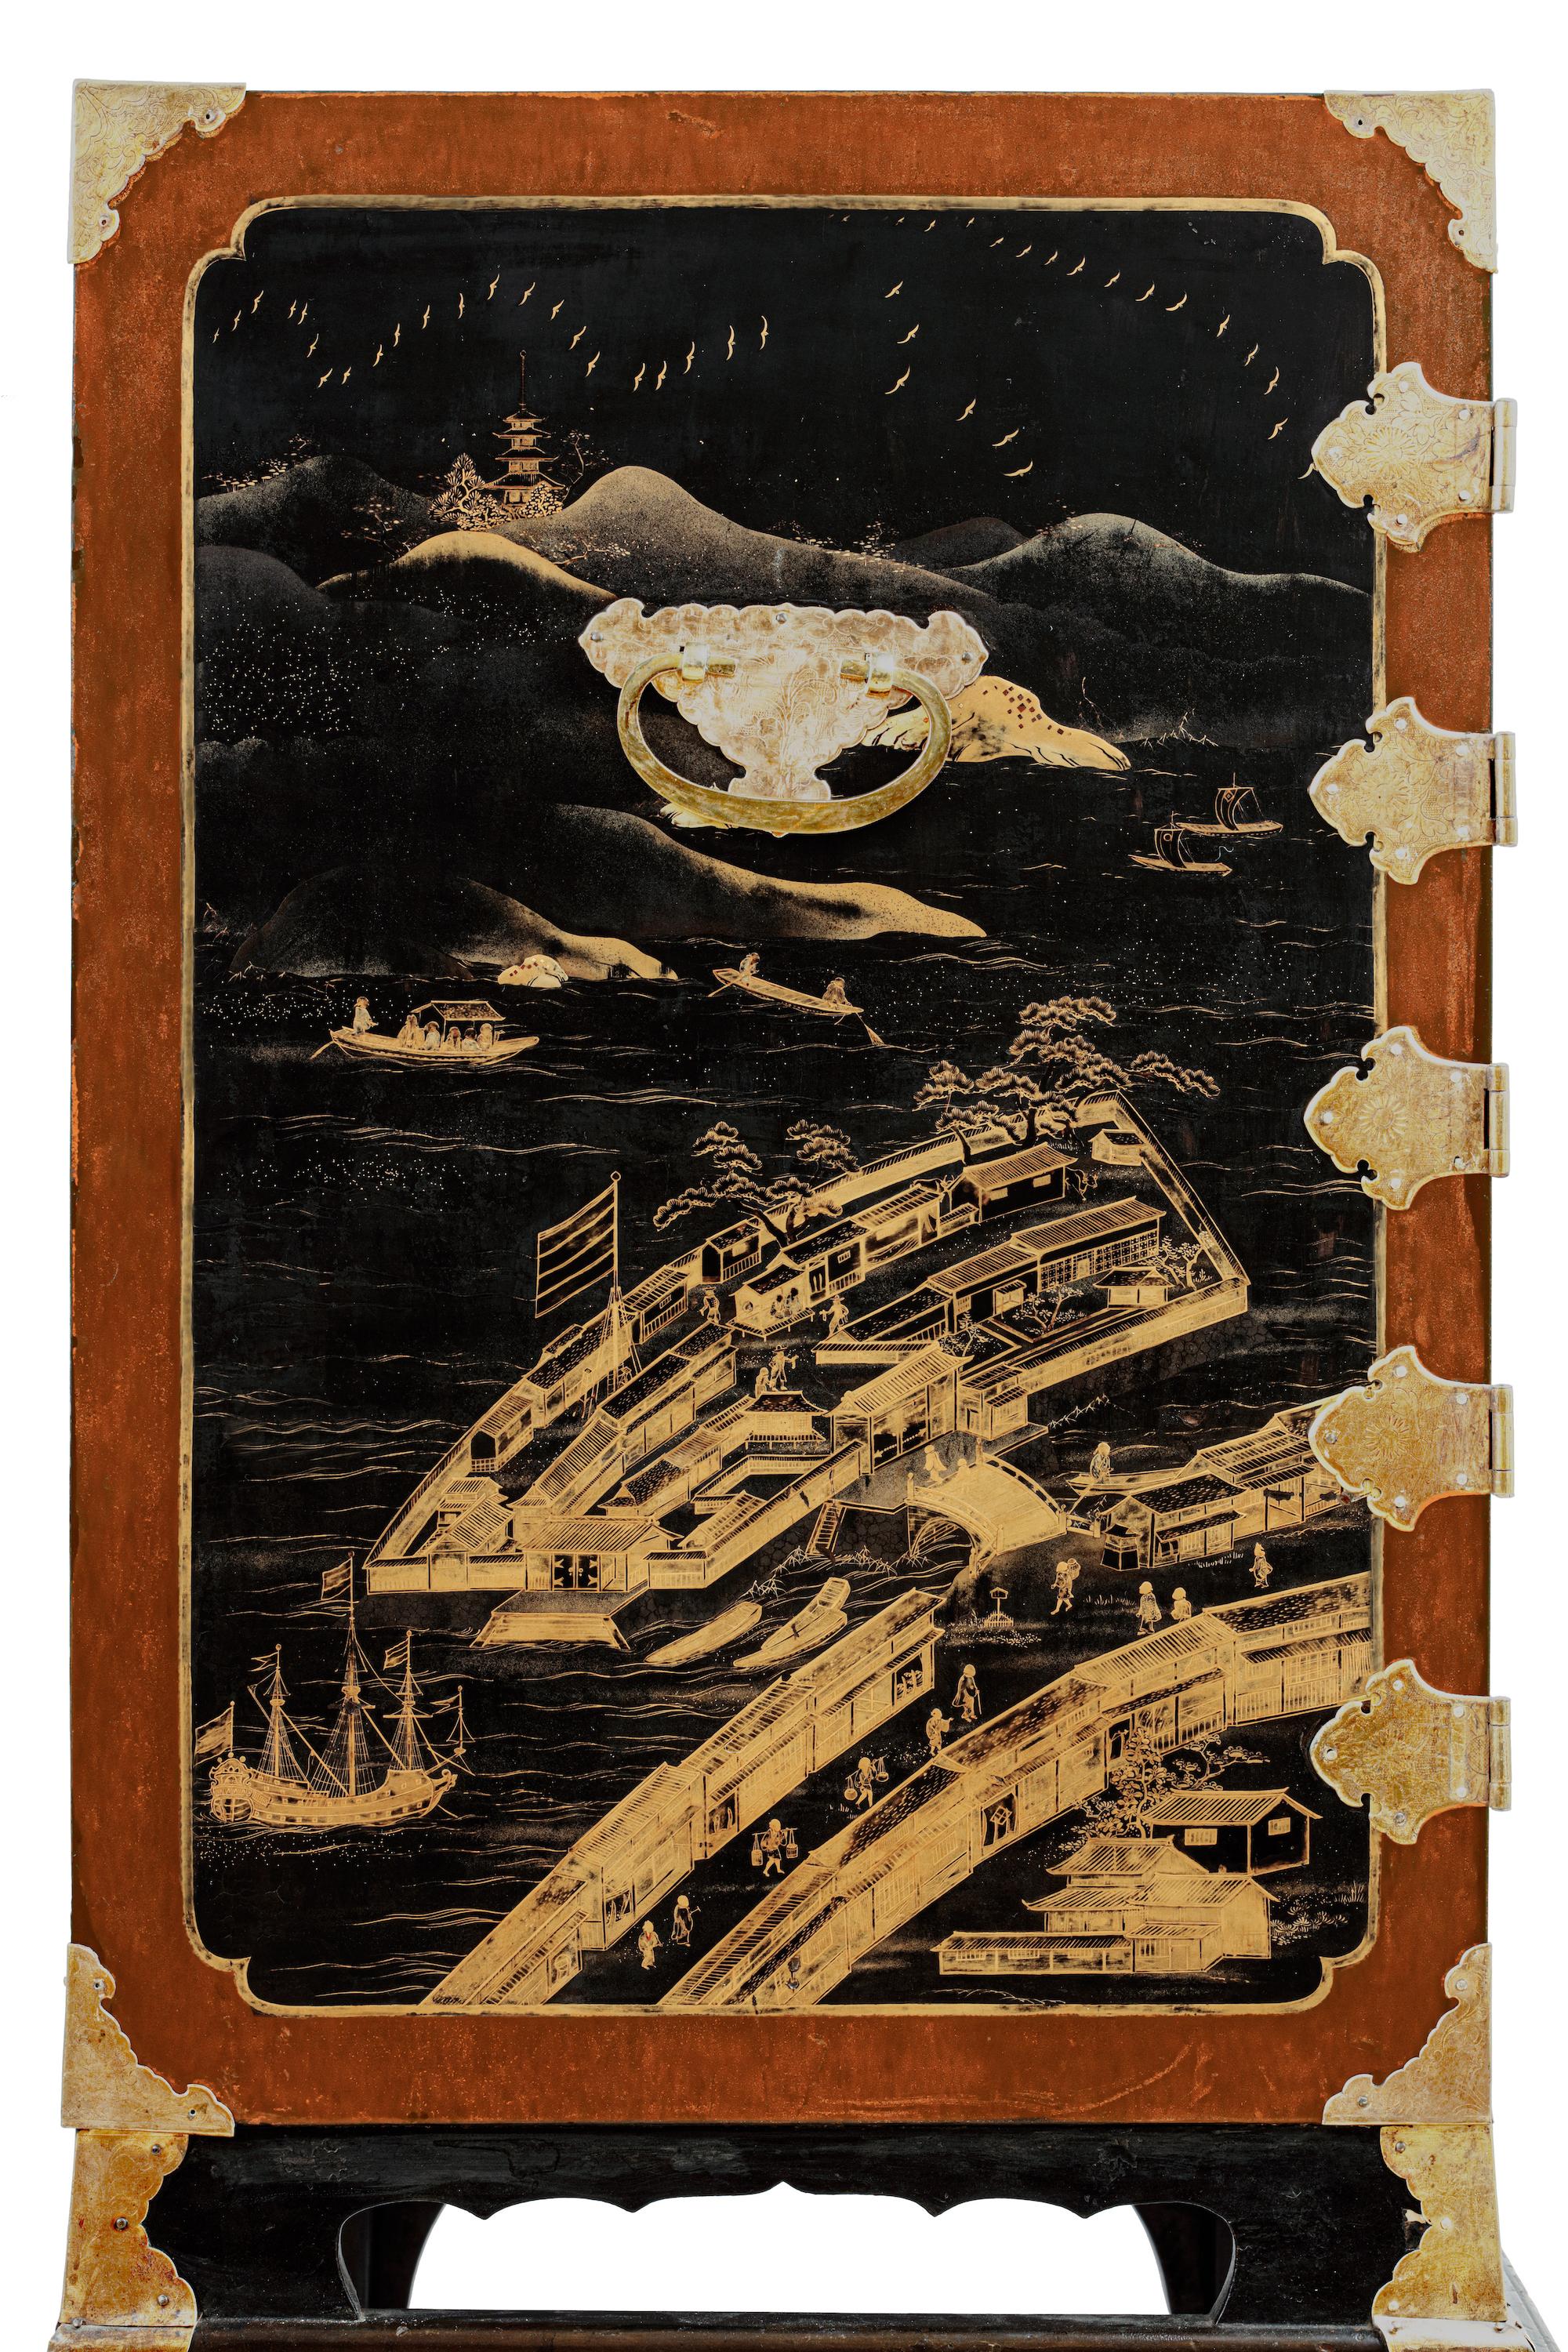 A highly important Japanese export lacquer cabinet with depiction of the Dutch East India Company tradepost Deshima and the annual Dutch delegation on its way to the Shogun in Edo

Edo period, circa 1660-1680
 
H. 88 x W. 100.5 x D. 54